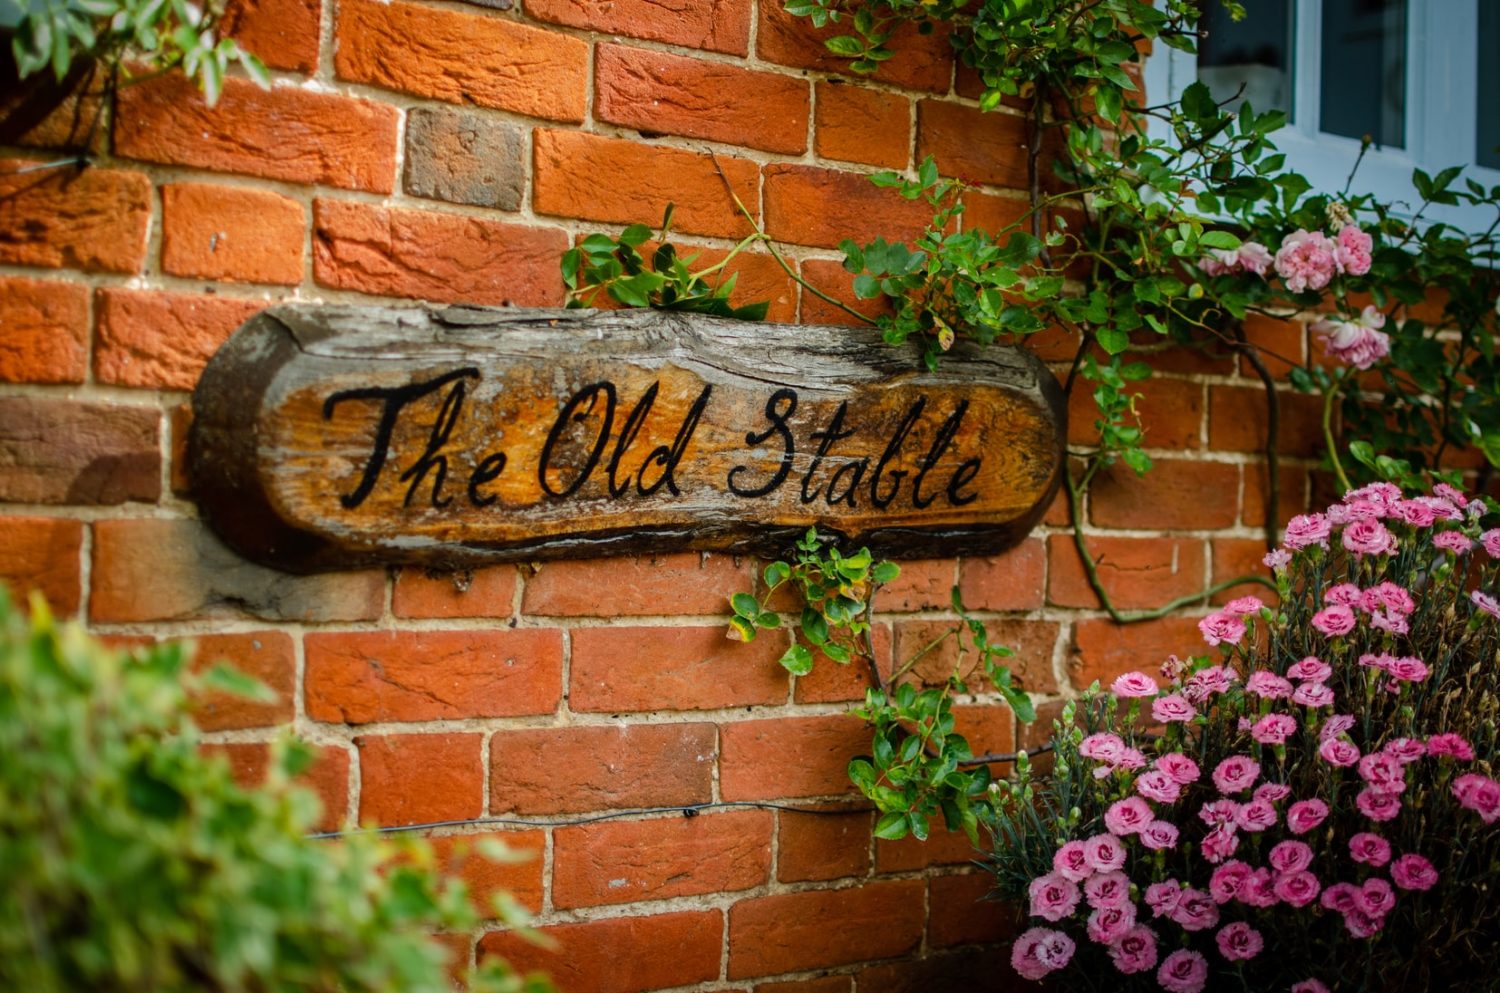 the old stable sign